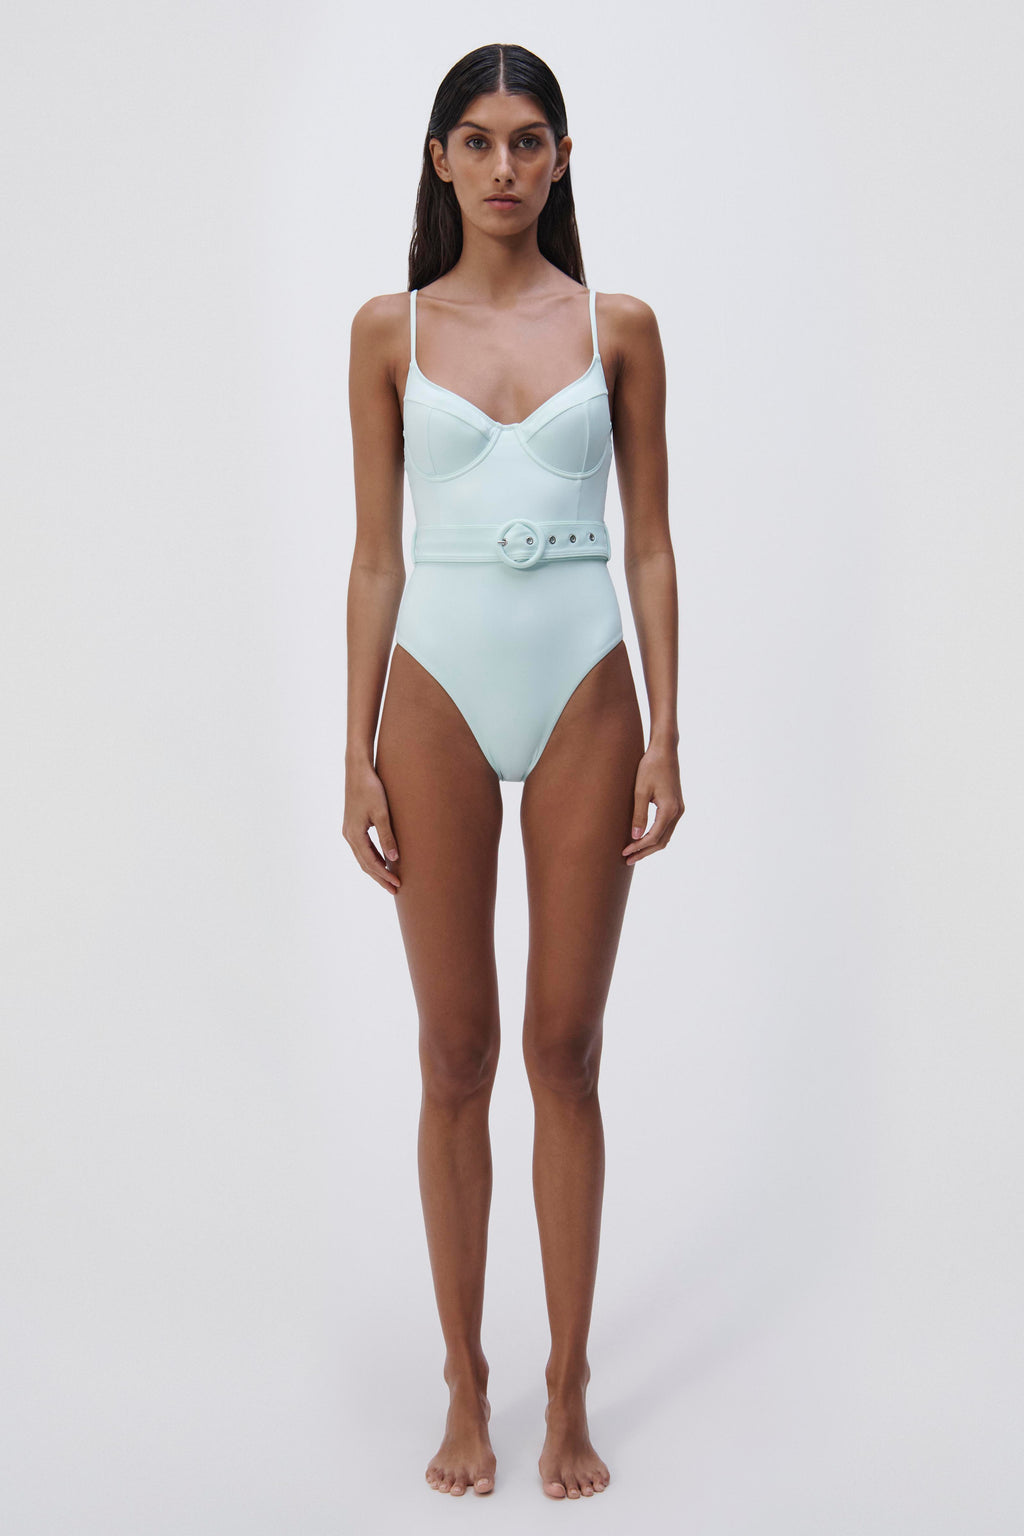 Noa Belted One Piece